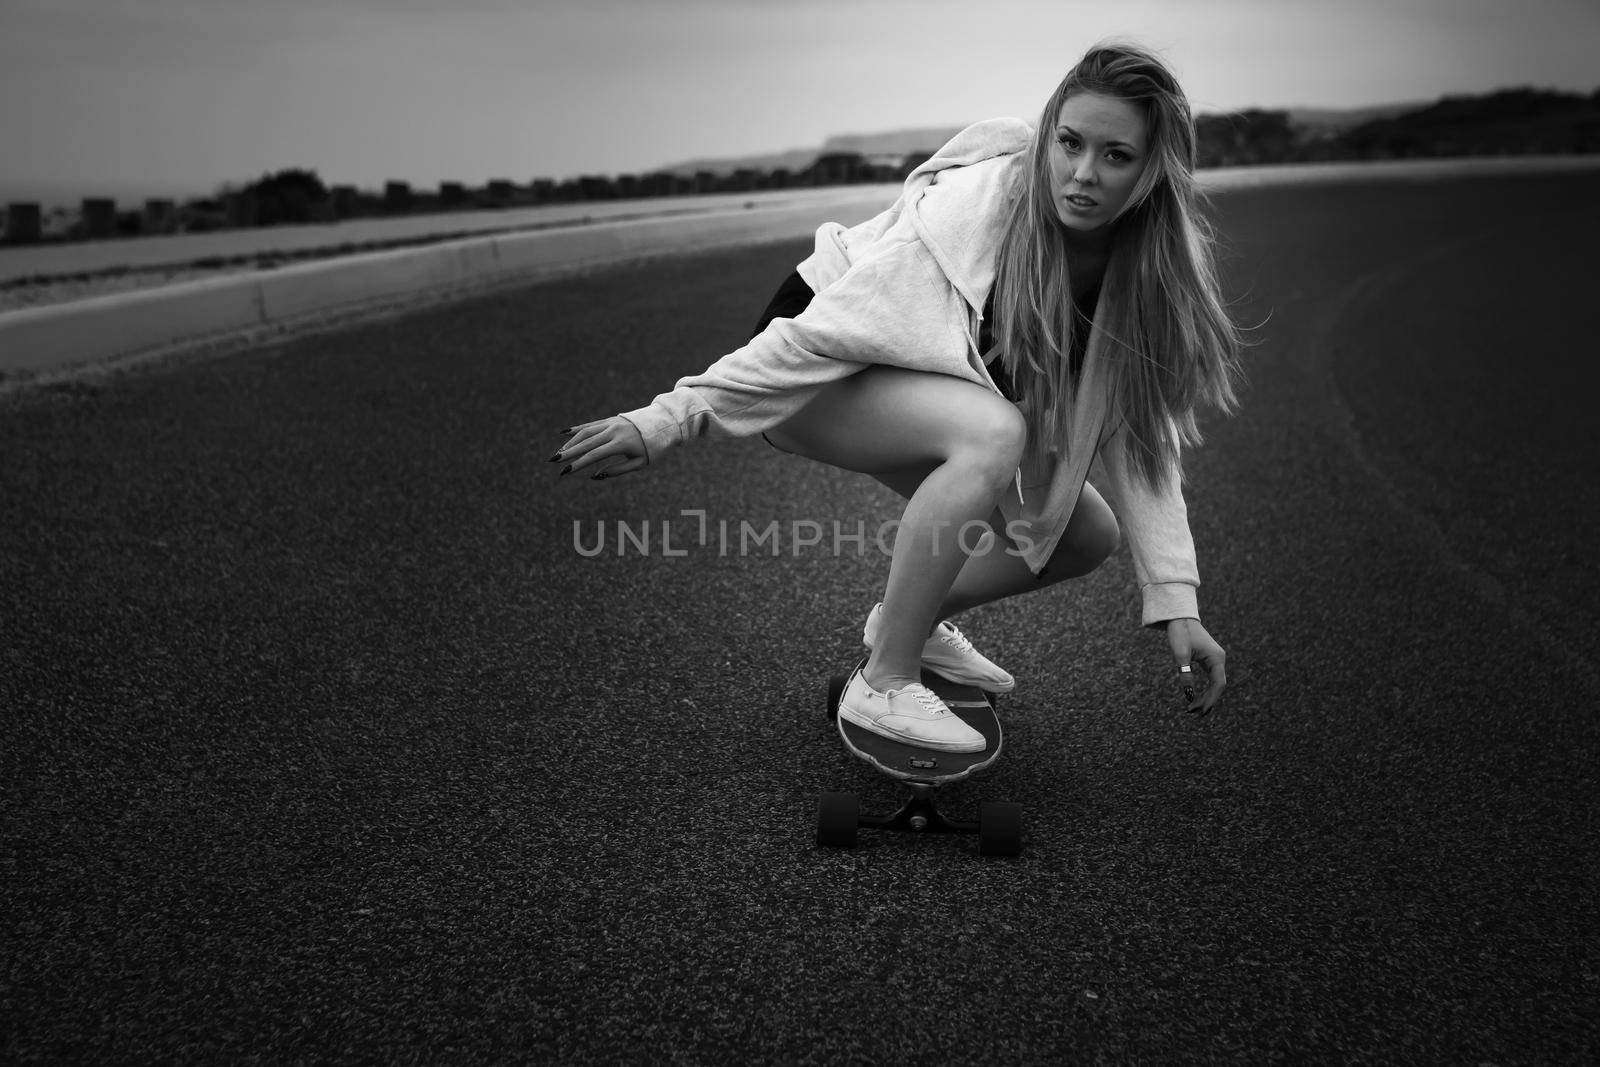 Girl making a downhill with her Skate